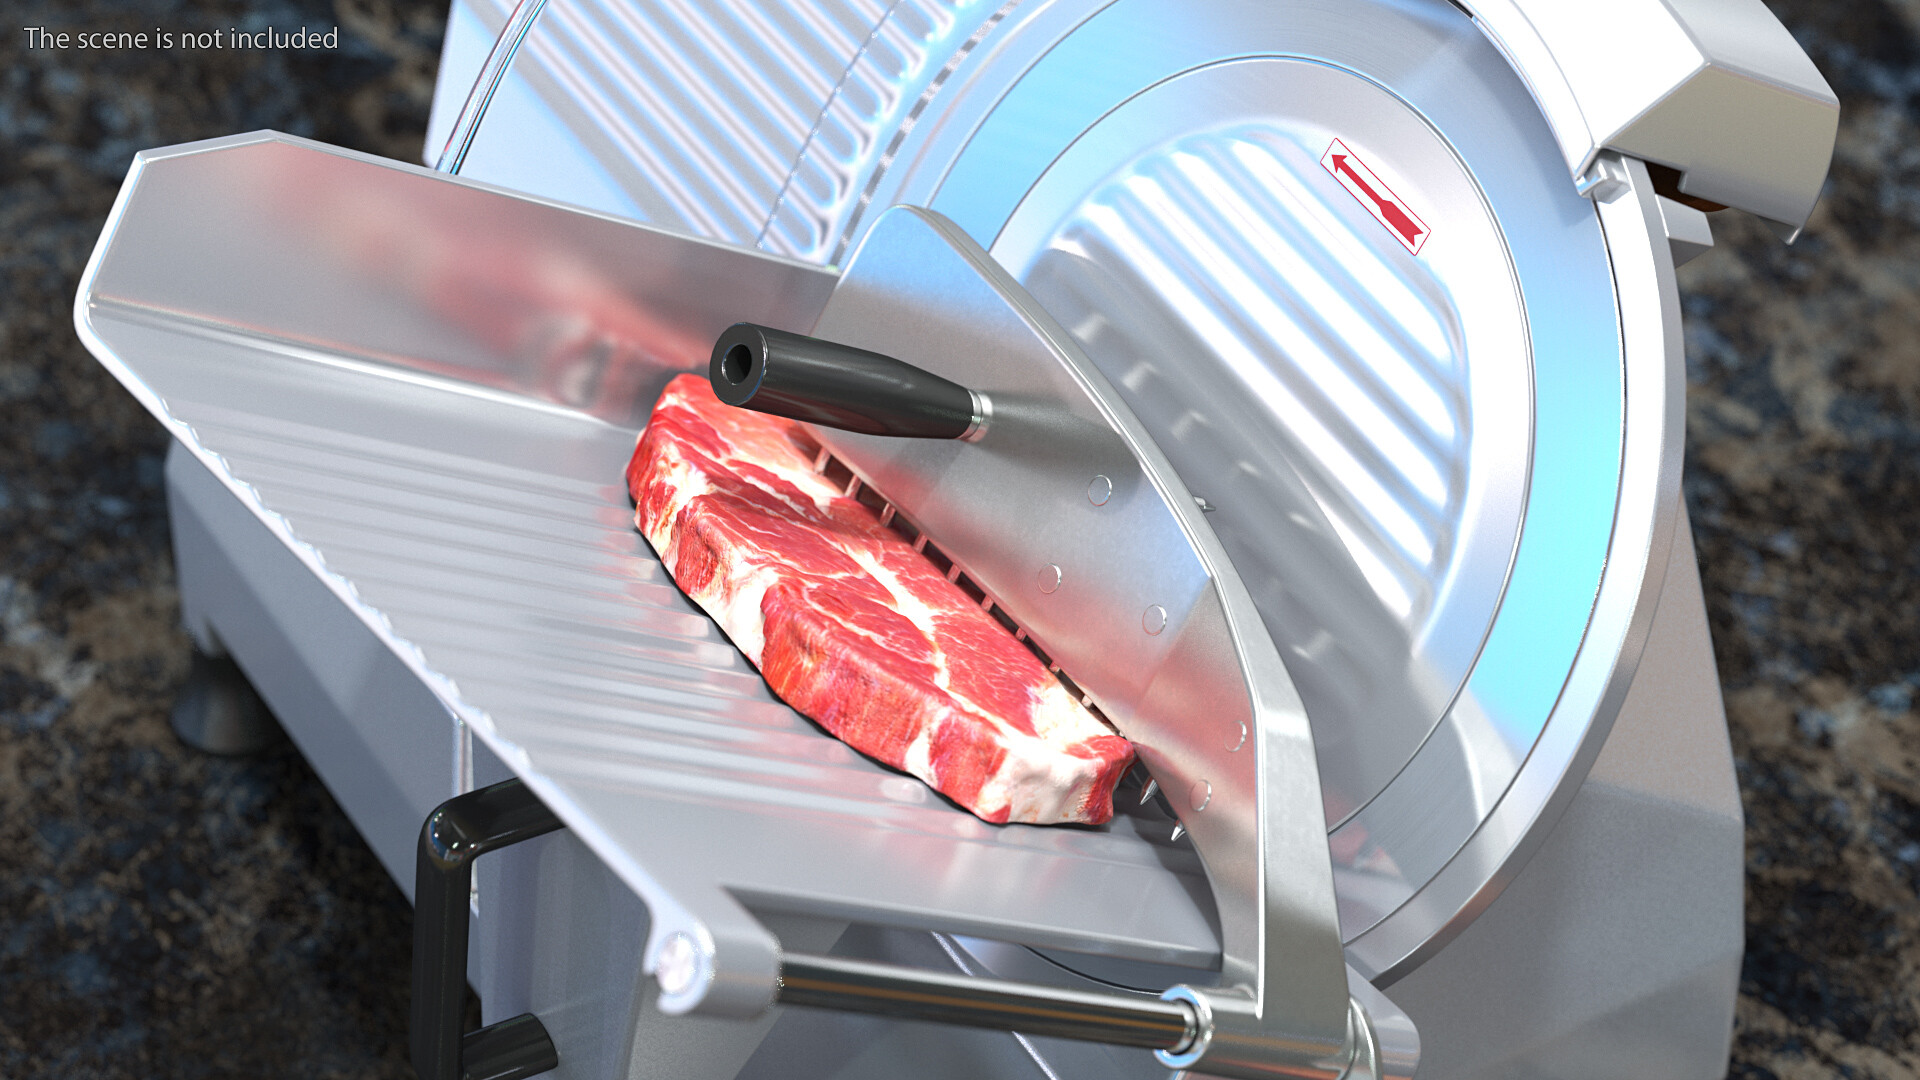 2,145 Meat Slicer Images, Stock Photos, 3D objects, & Vectors